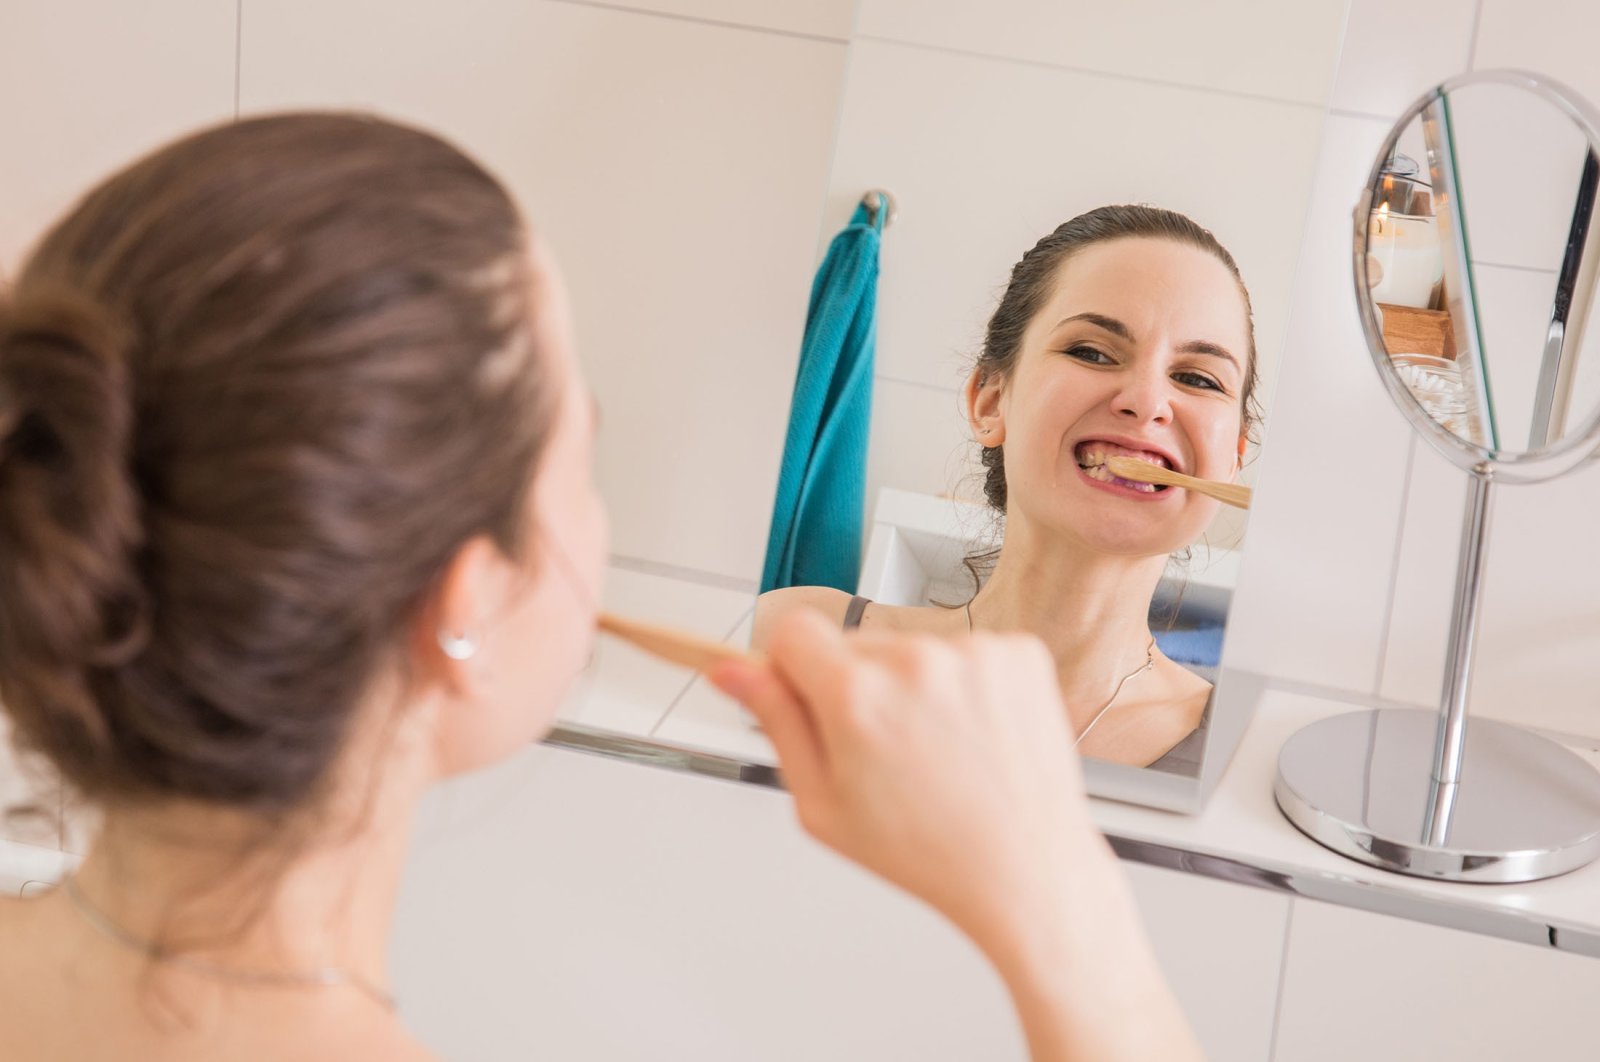 Brushing teeth and tongue regularly and thoroughly is the first step to decrease the foul odor of sulfurous gases in the mouth. (DPA)